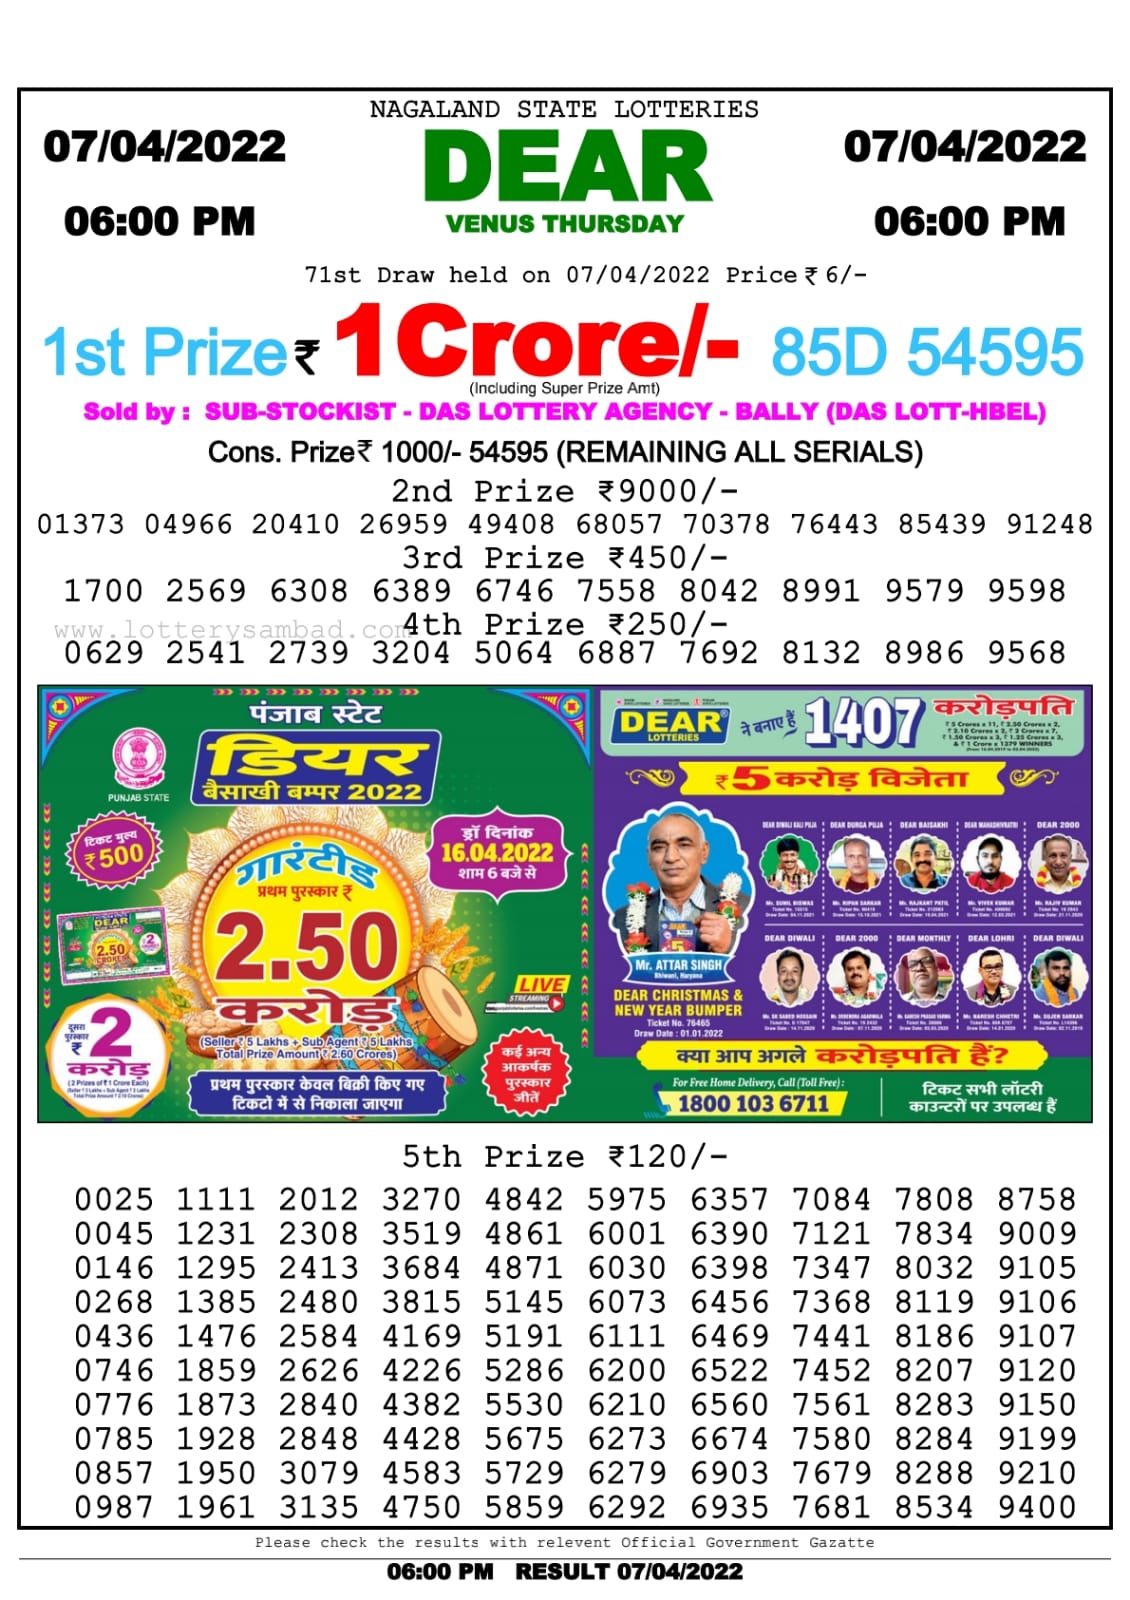 Dear Lottery Nagaland state Lottery Results 06.00 pm 07.04.2022